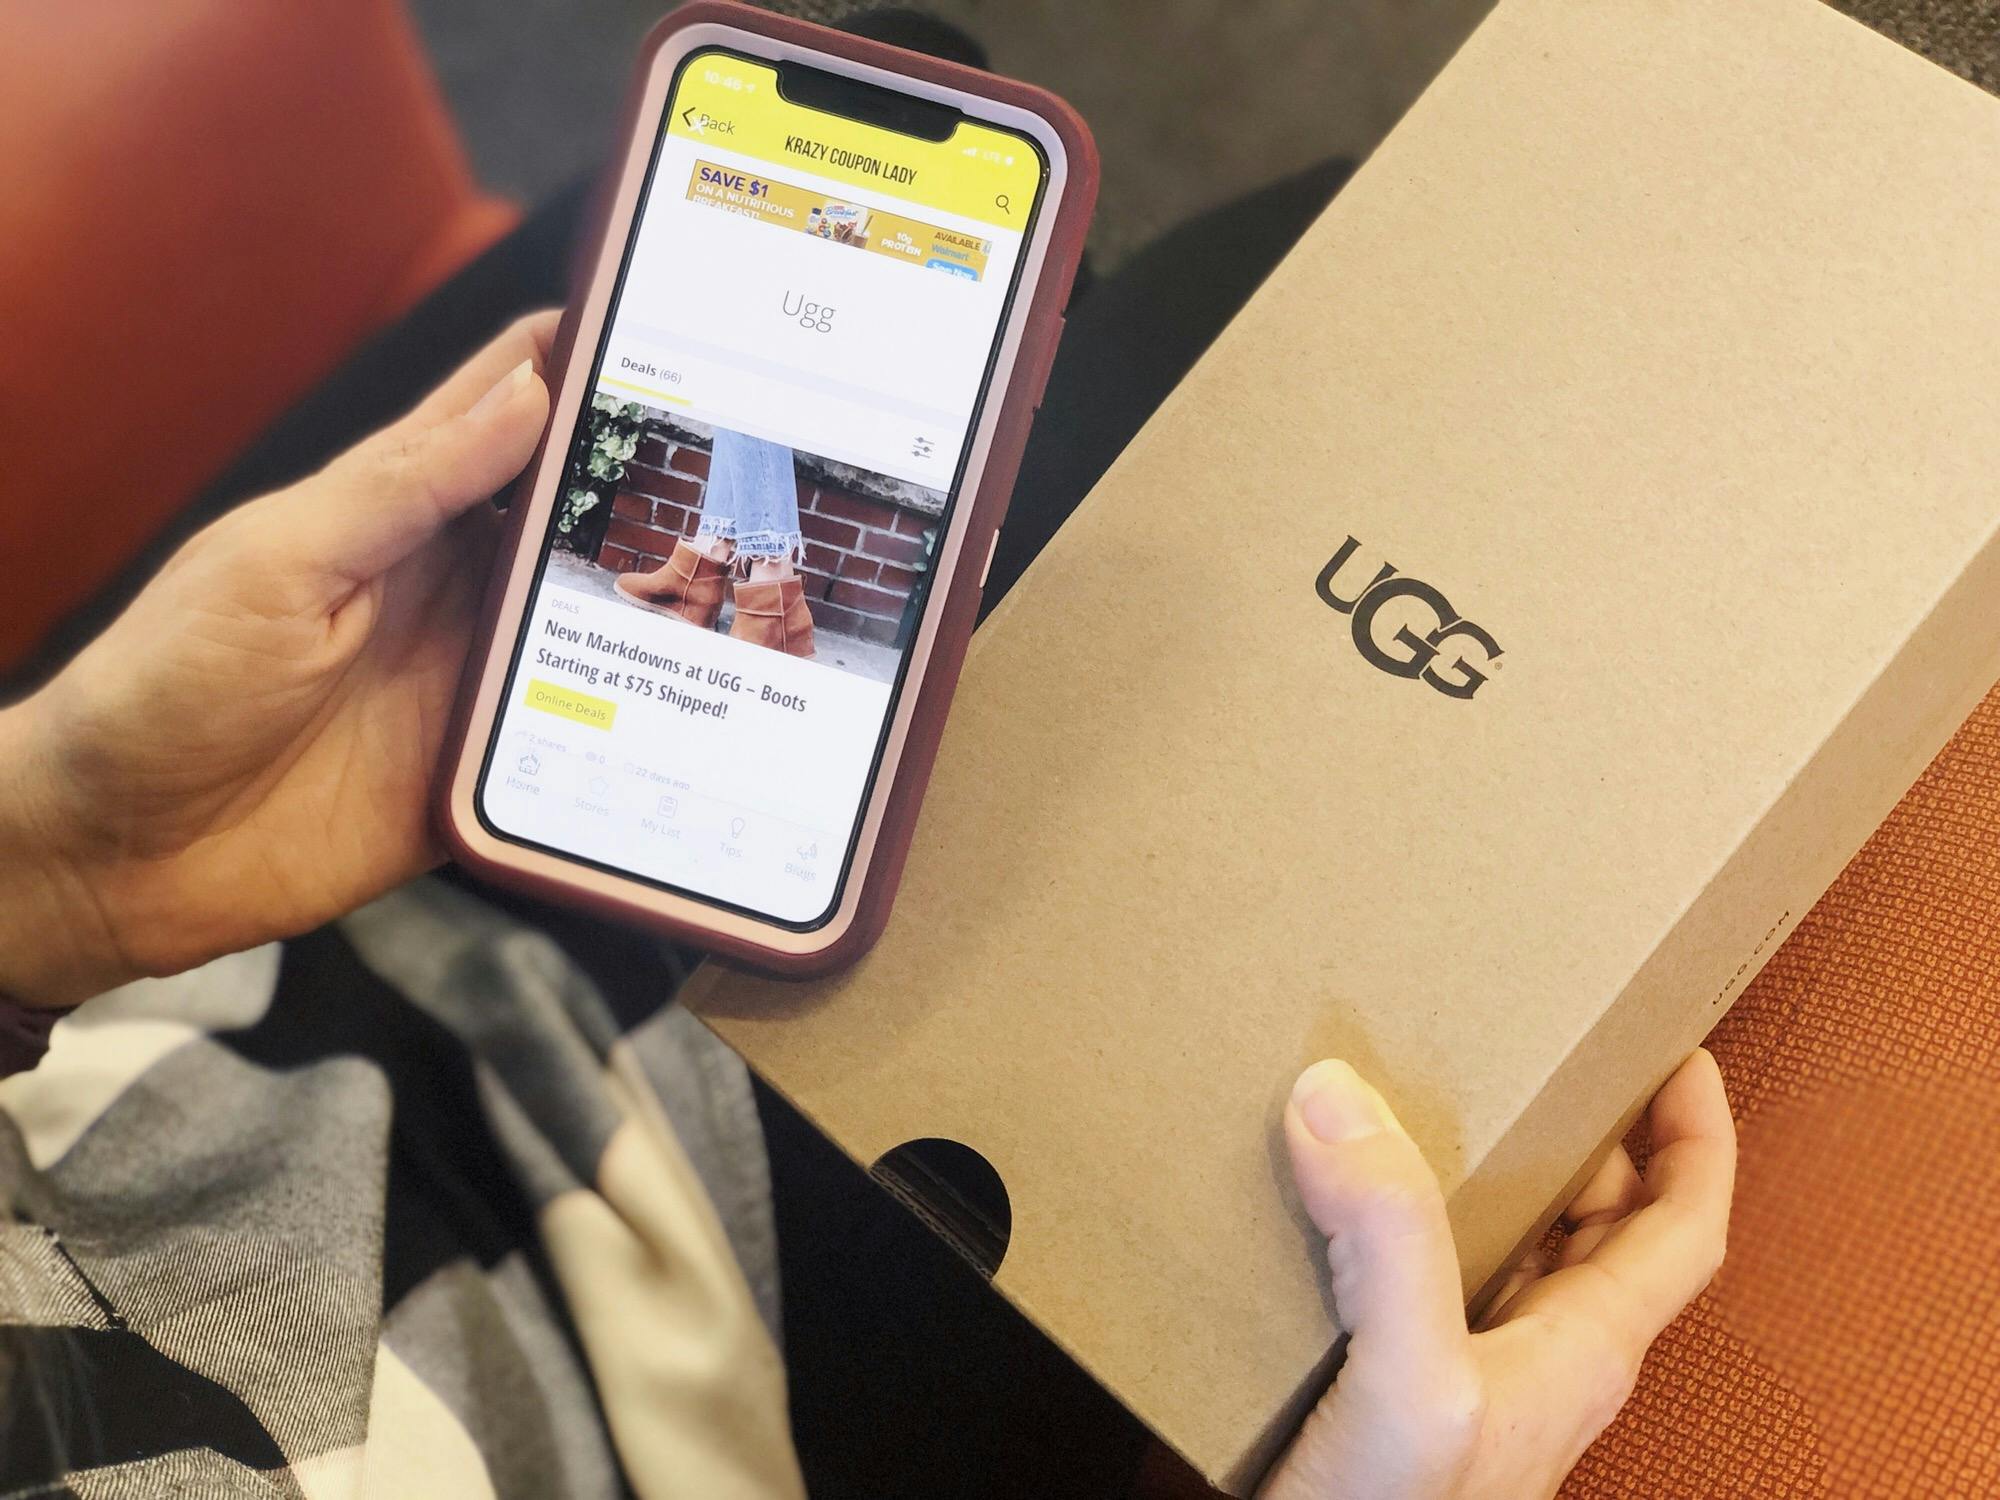 Person looking at Ugg in KCL app and holding Ugg box